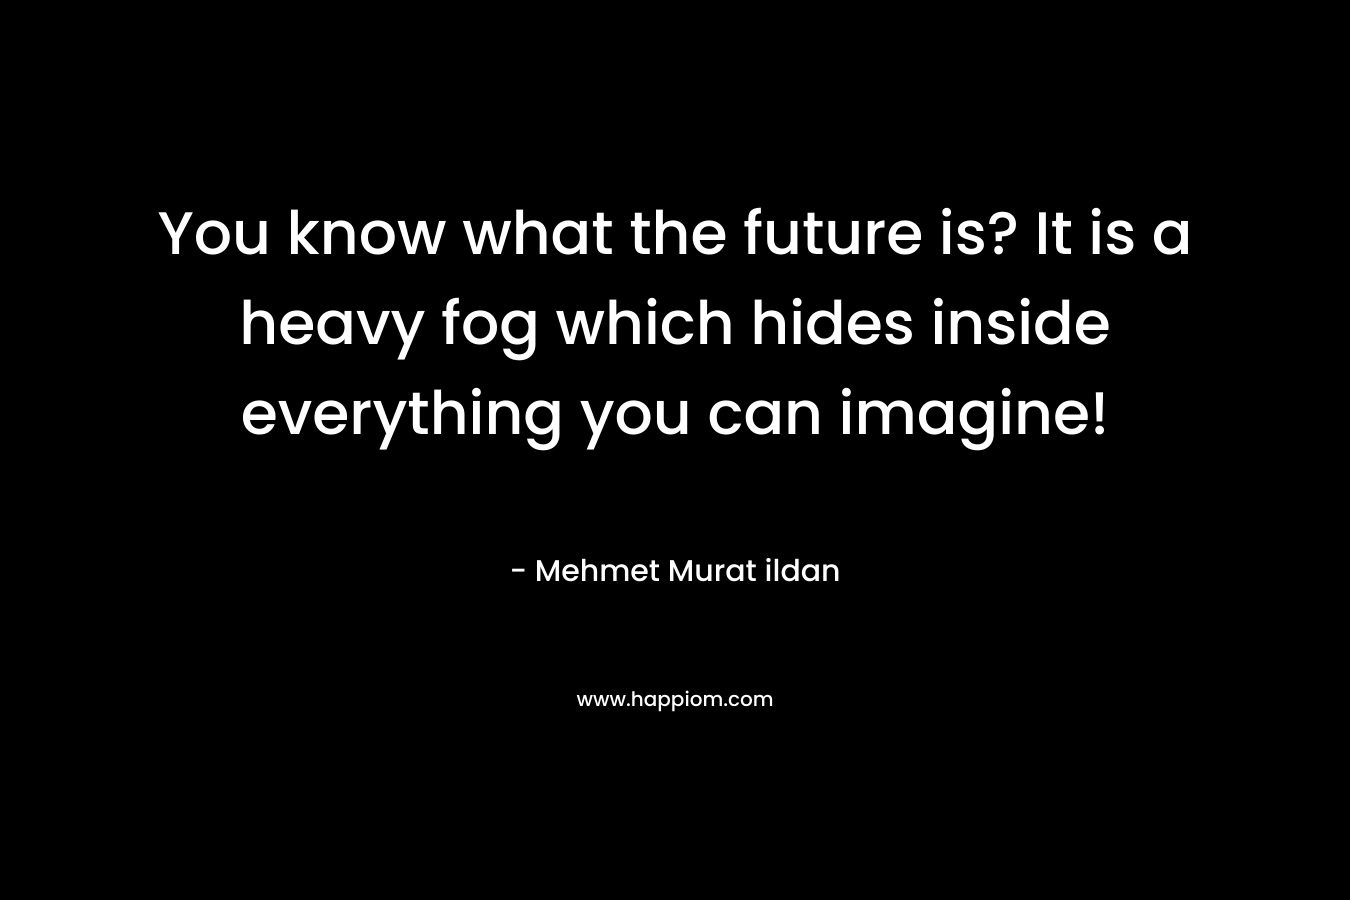 You know what the future is? It is a heavy fog which hides inside everything you can imagine! – Mehmet Murat ildan